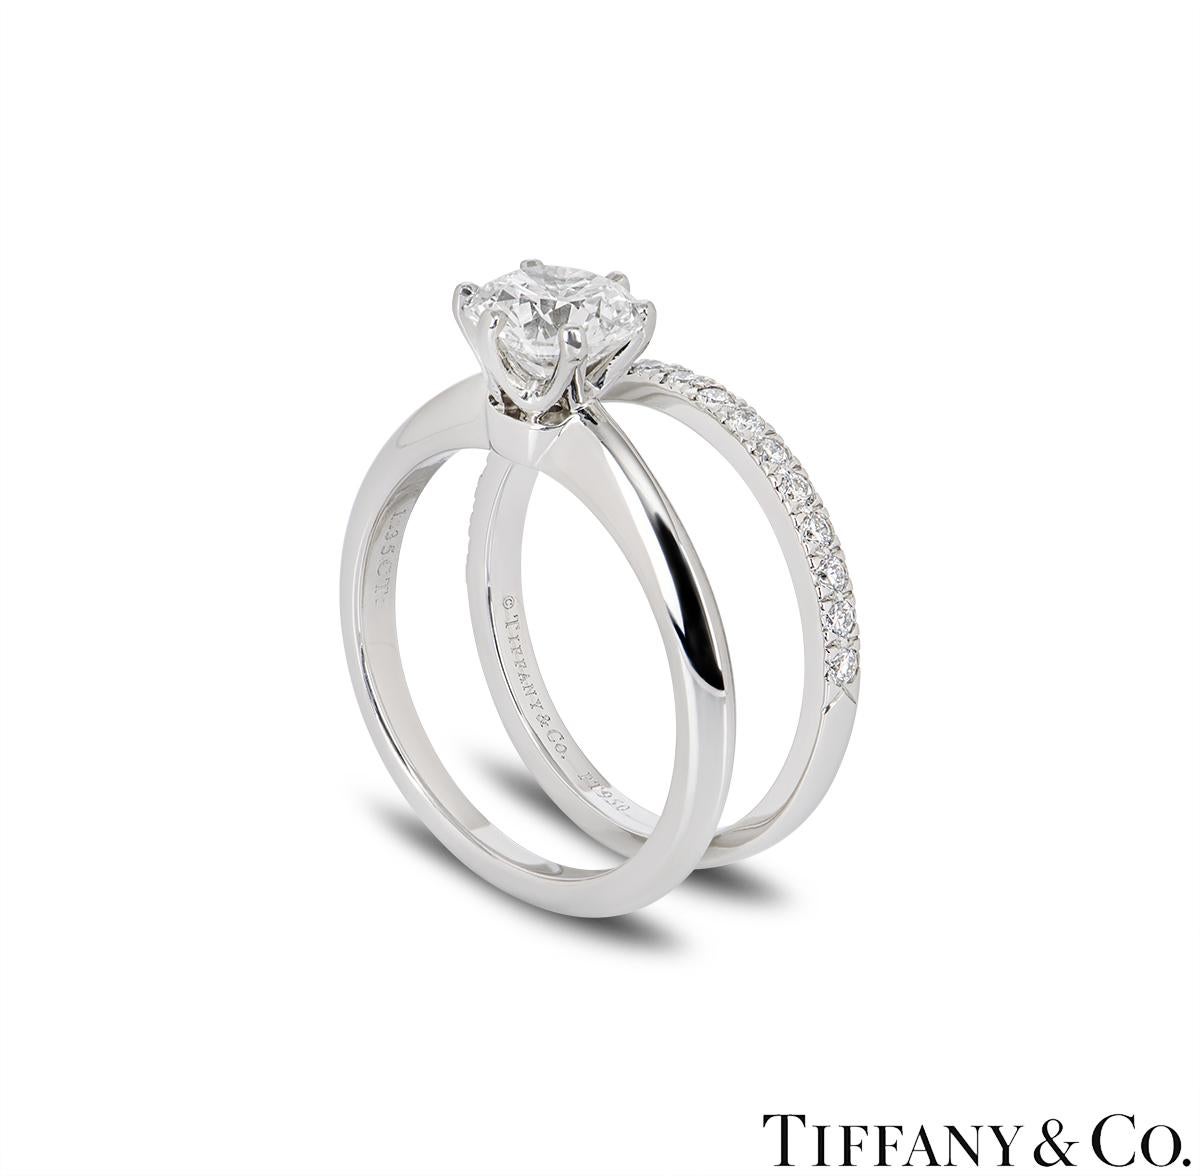 A stunning platinum Tiffany & Co. diamond ring from the Setting collection. The ring comprises of a round brilliant cut diamond in a 6 claw setting with a weight of 1.35ct, H colour and VS1 clarity. The Setting ring is complemented by a half diamond